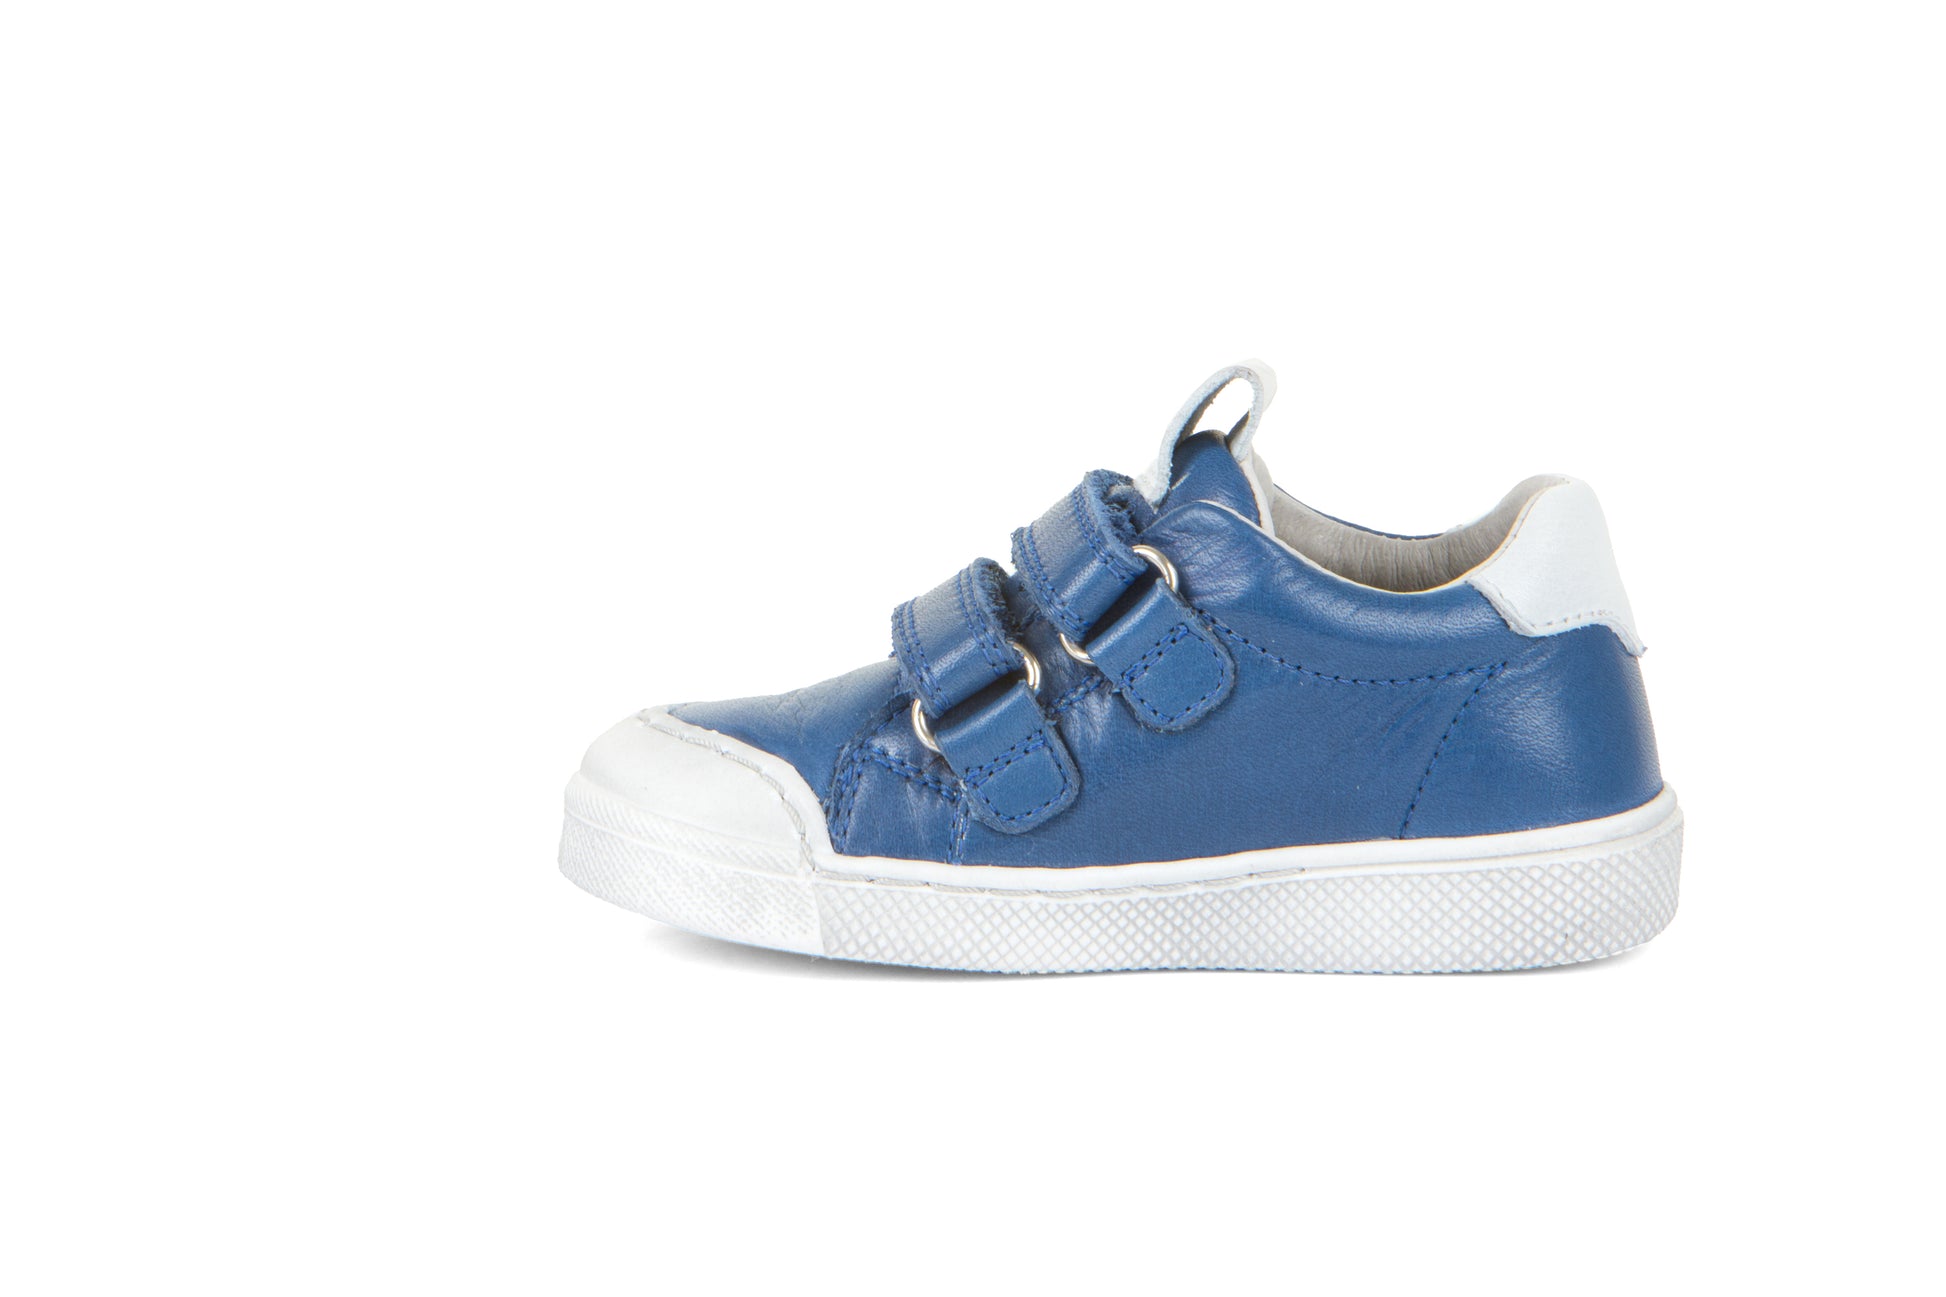 A boys casual shoe by Froddo, style G2130290-1 Rosario, in blue with white trim, velcro fastening. Inside view.